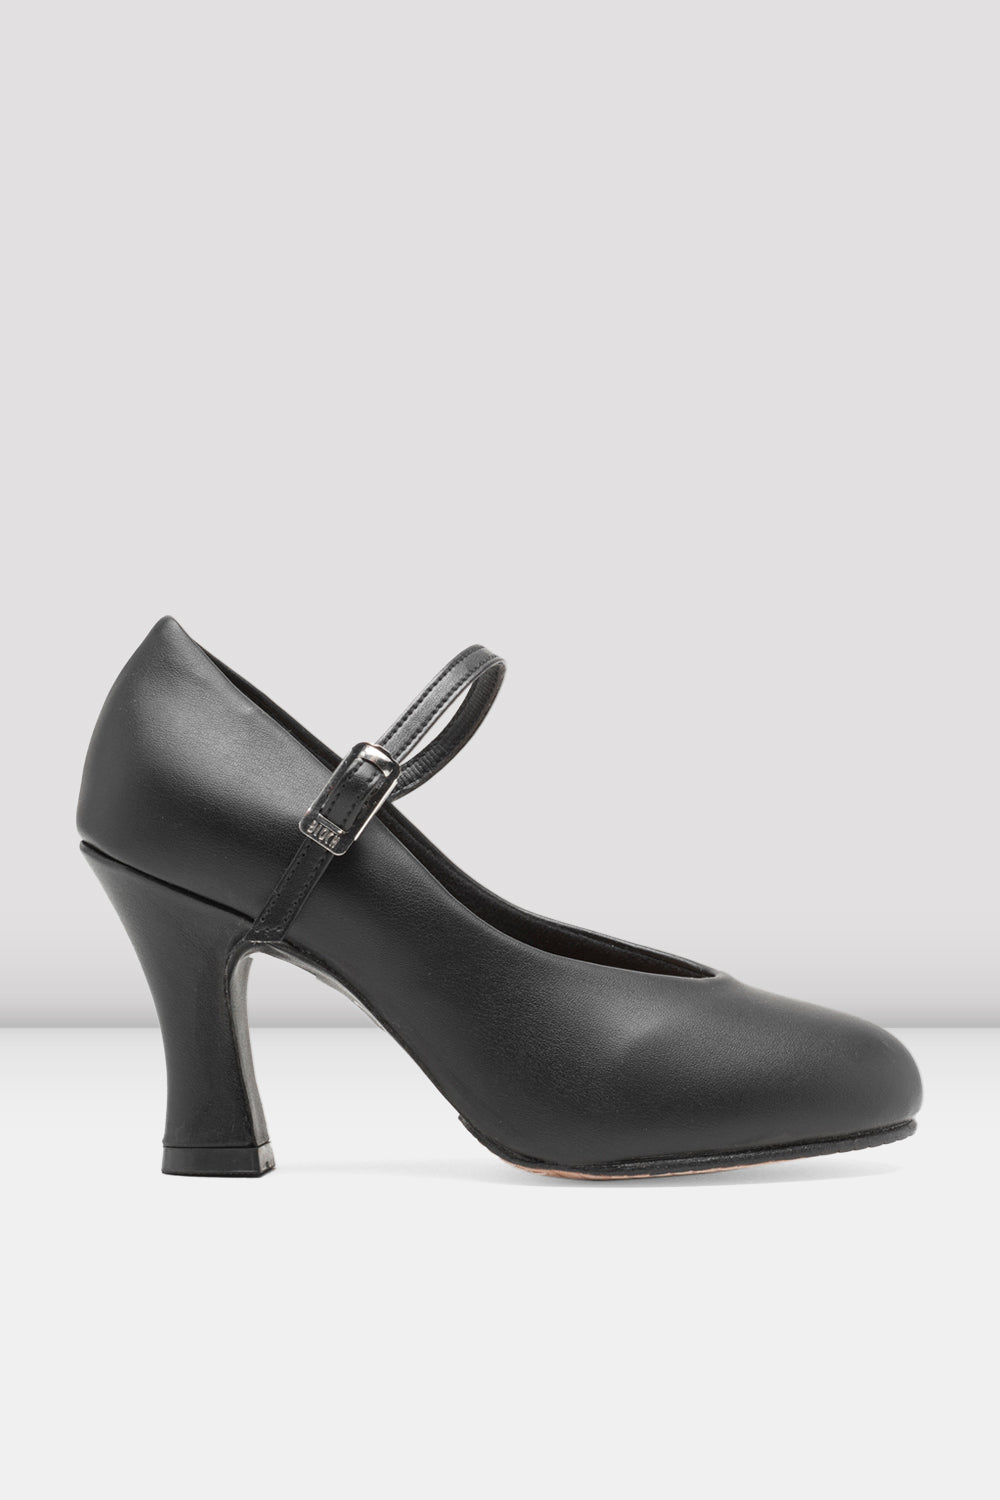 BLOCH Ladies Broadway-Hi Character Shoes, Black Synthetic Leather